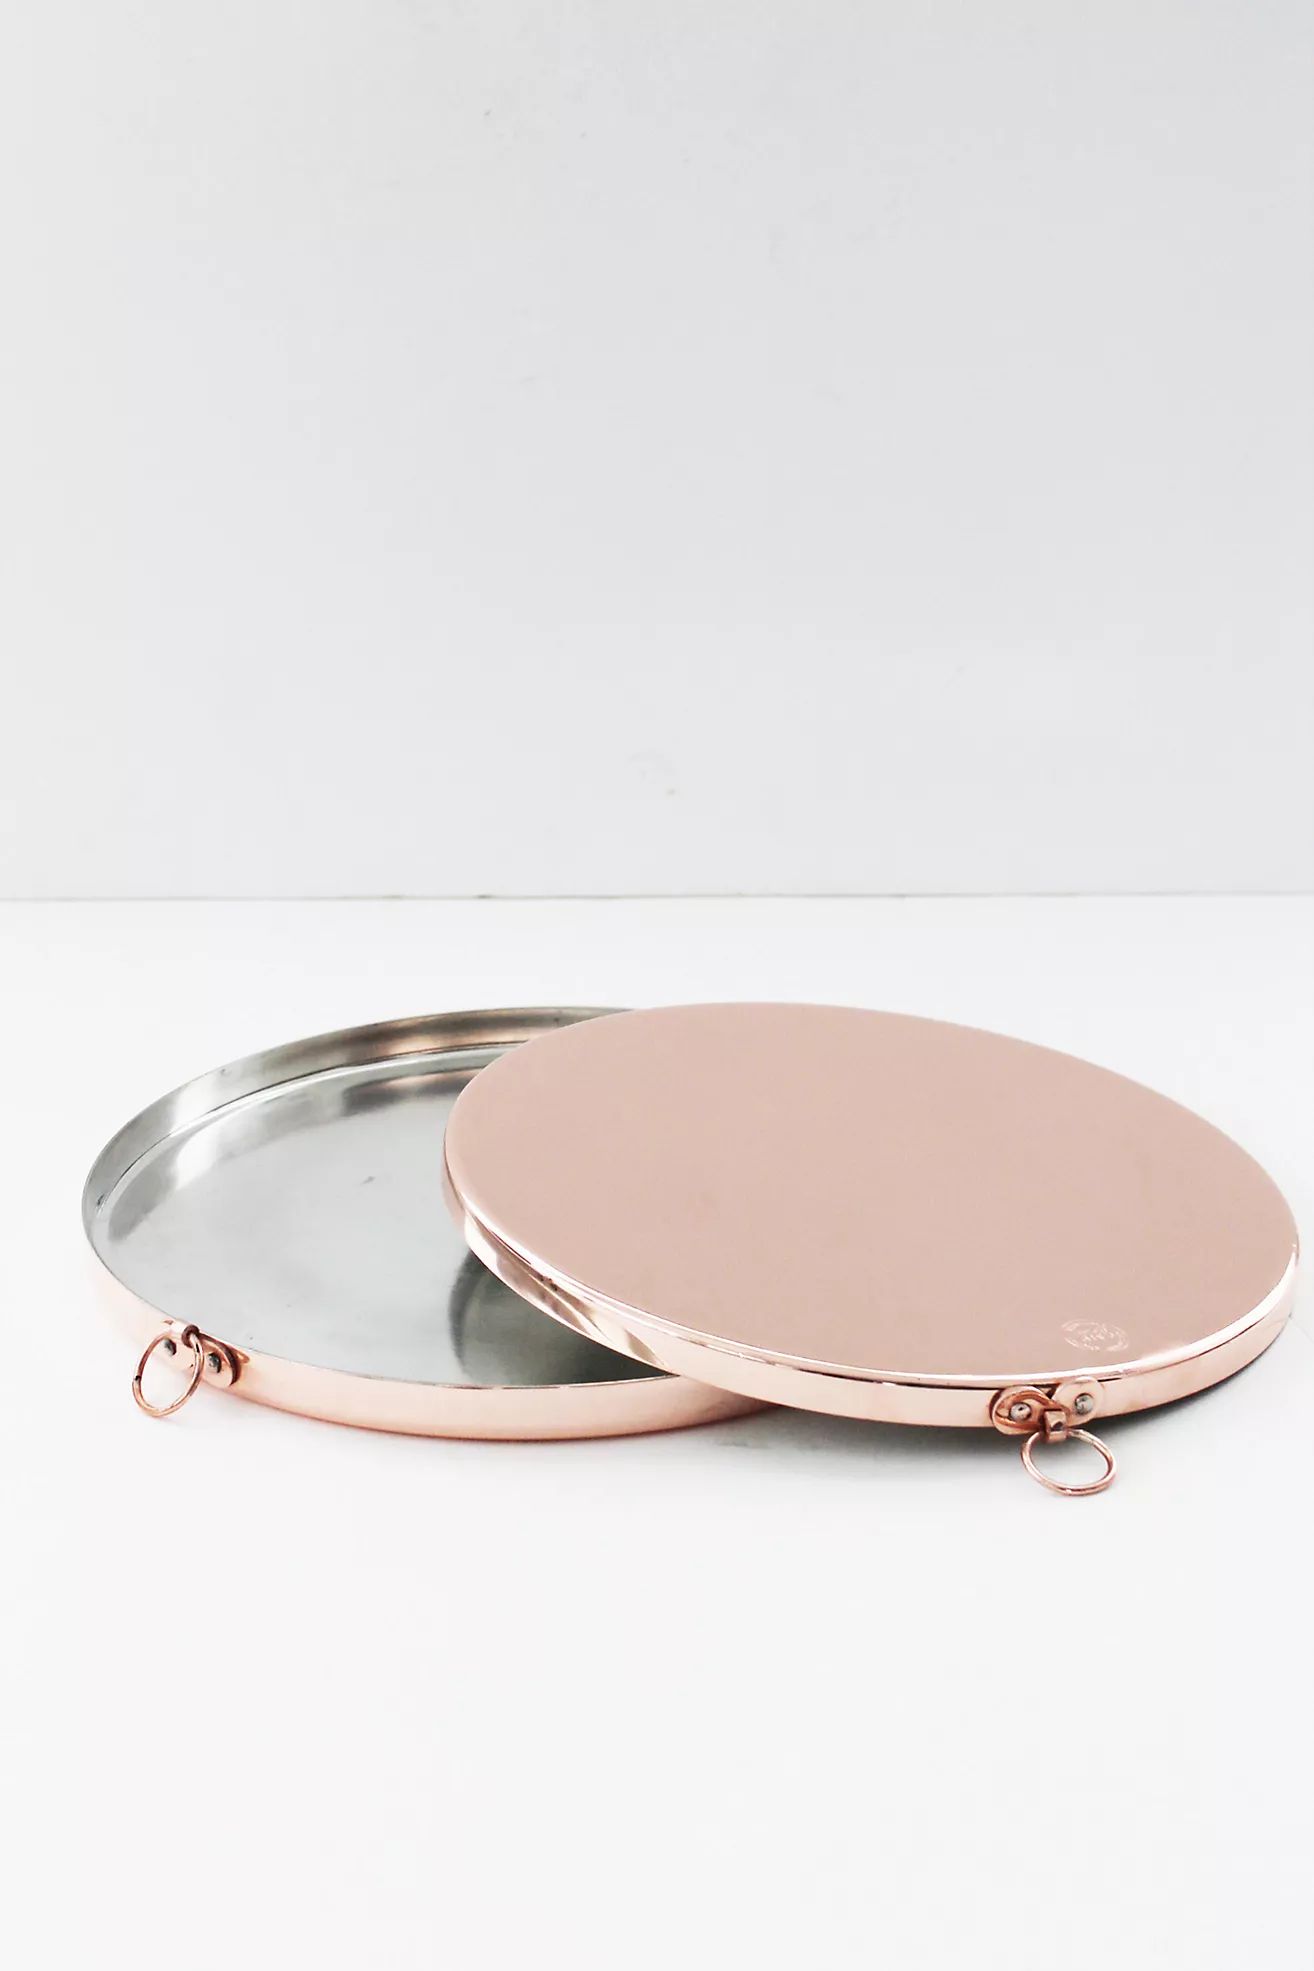 Coppermill Kitchen Vintage Inspired Baking Tray | Anthropologie (US)